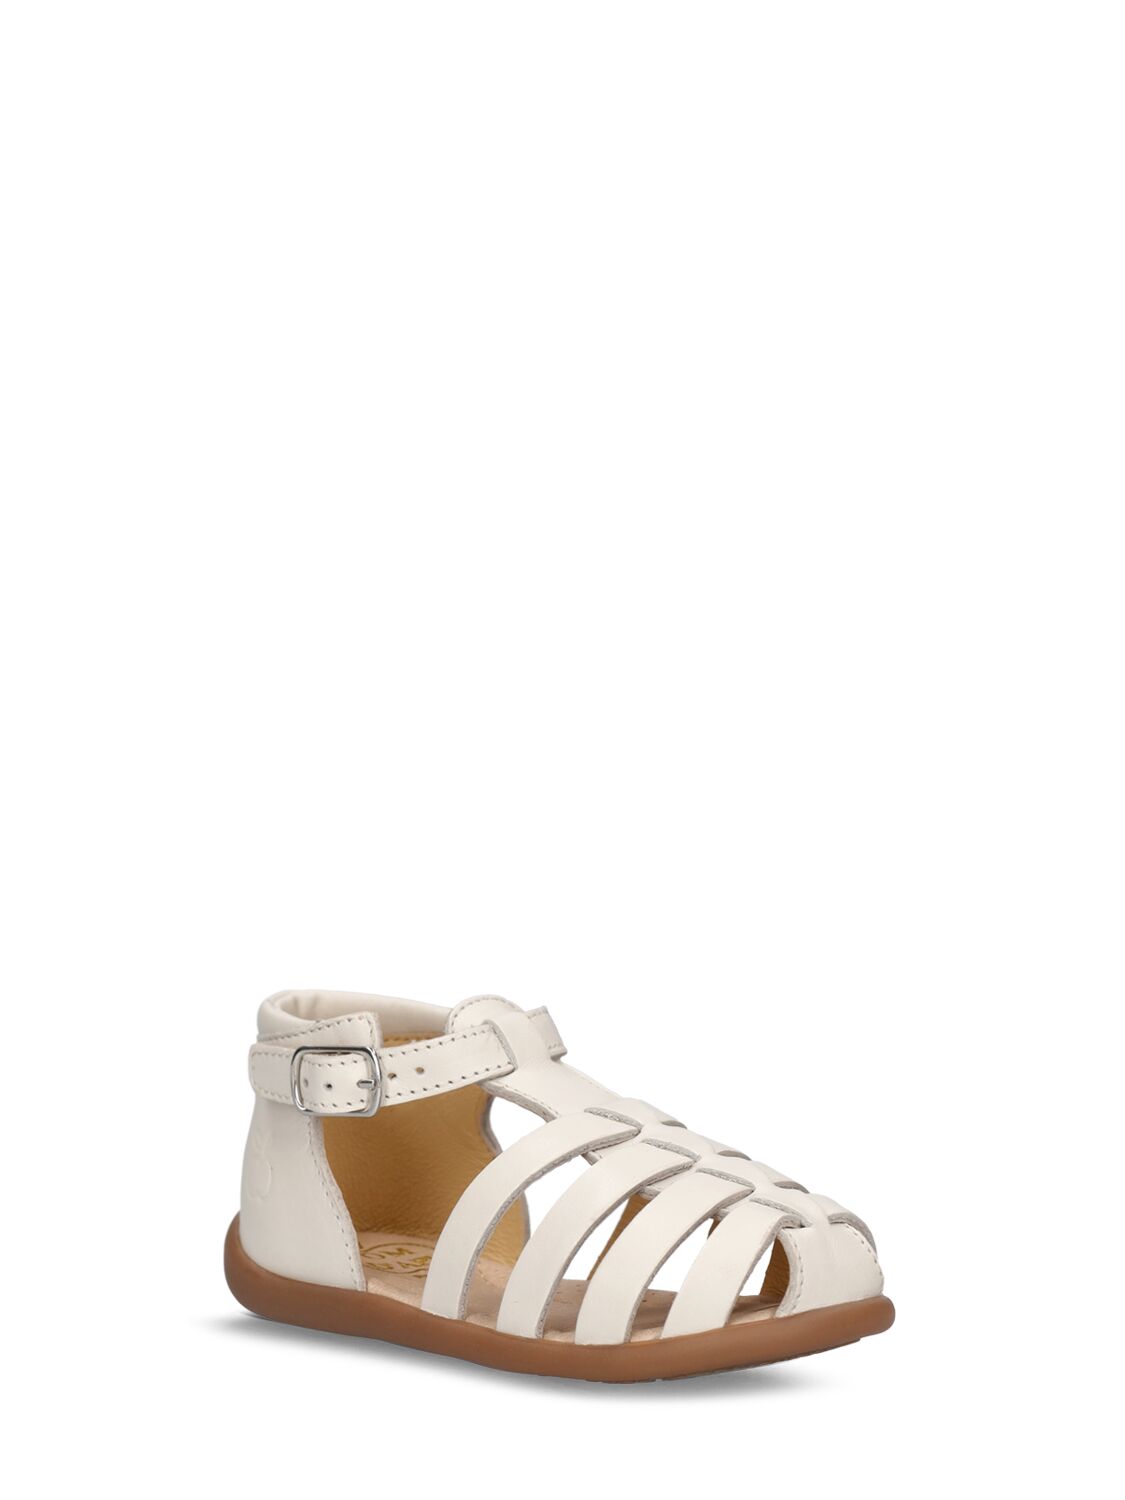 Shop Pom D'api Nappa Leather Sandals In Off-white